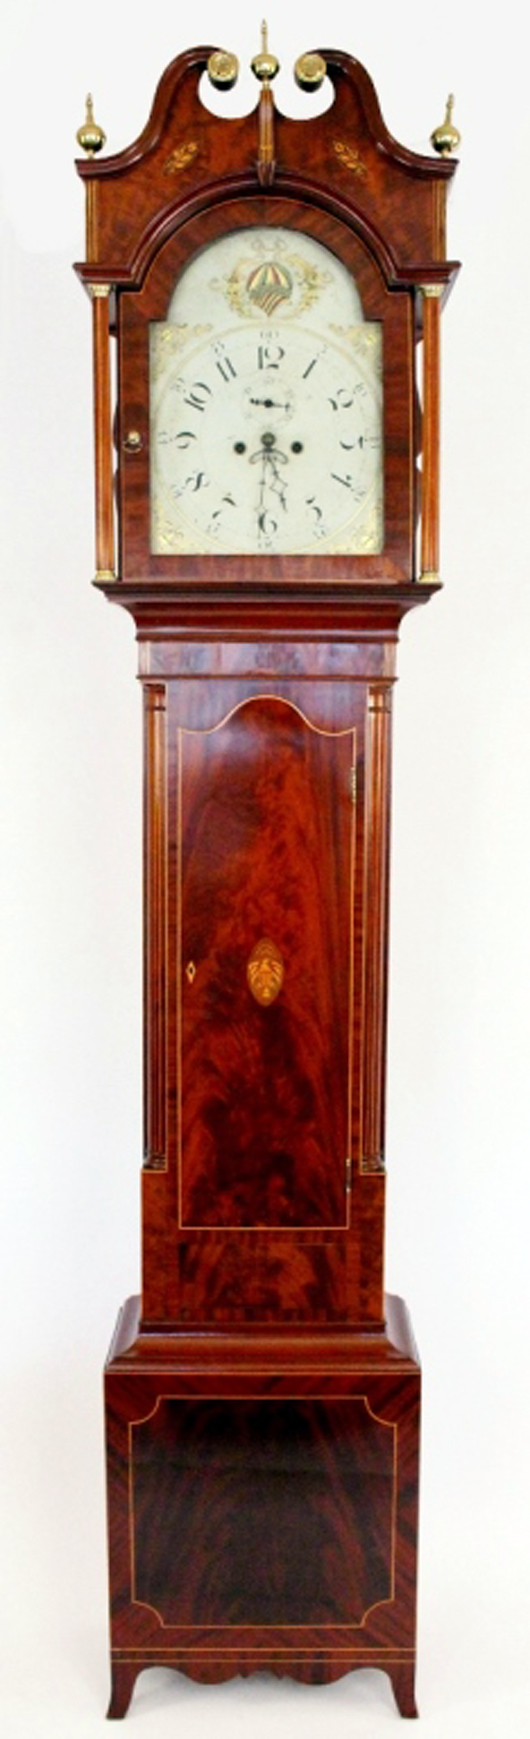 Federal eagle-inlaid and figured mahogany tall case clock, circa 1800, attributed to Matthew Egerton. Price realized: $23,500. Ahlers & Ogletree image.